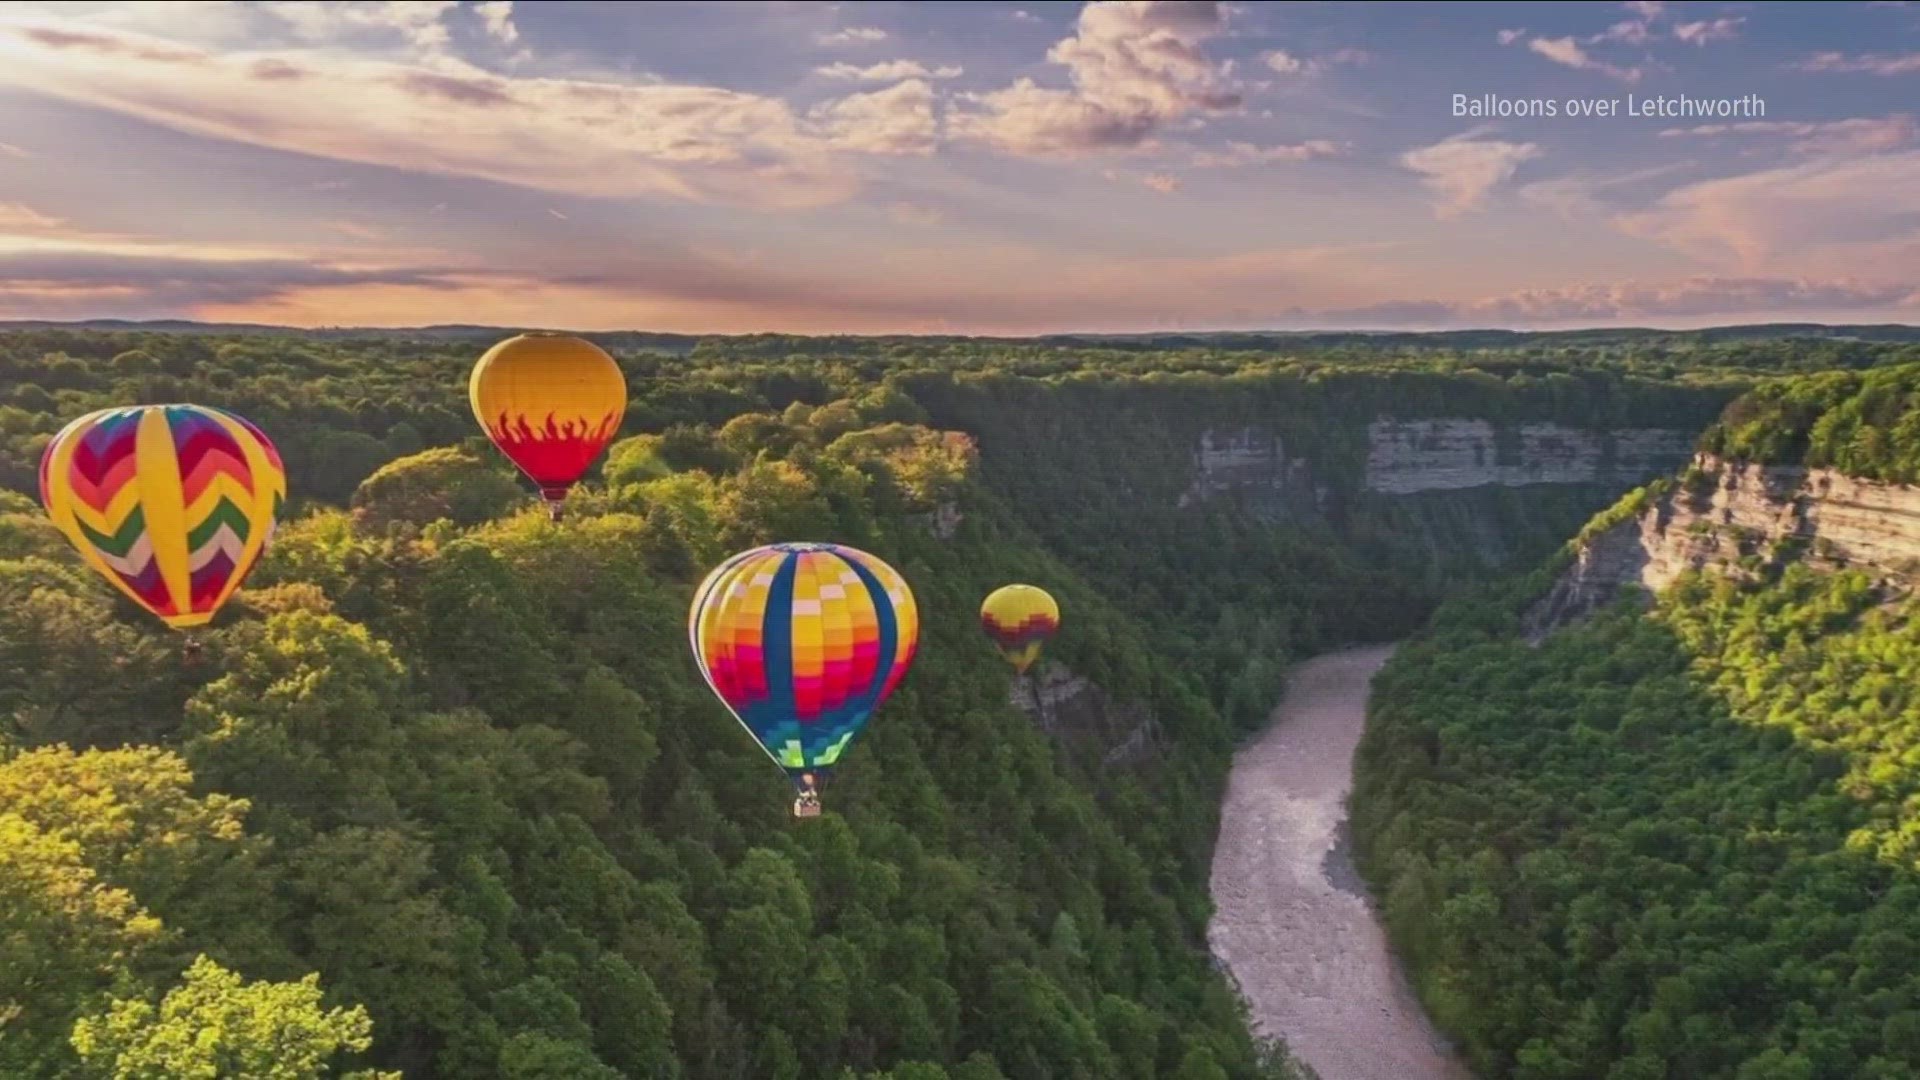 20 hot air balloons to flyover Letchworth state park